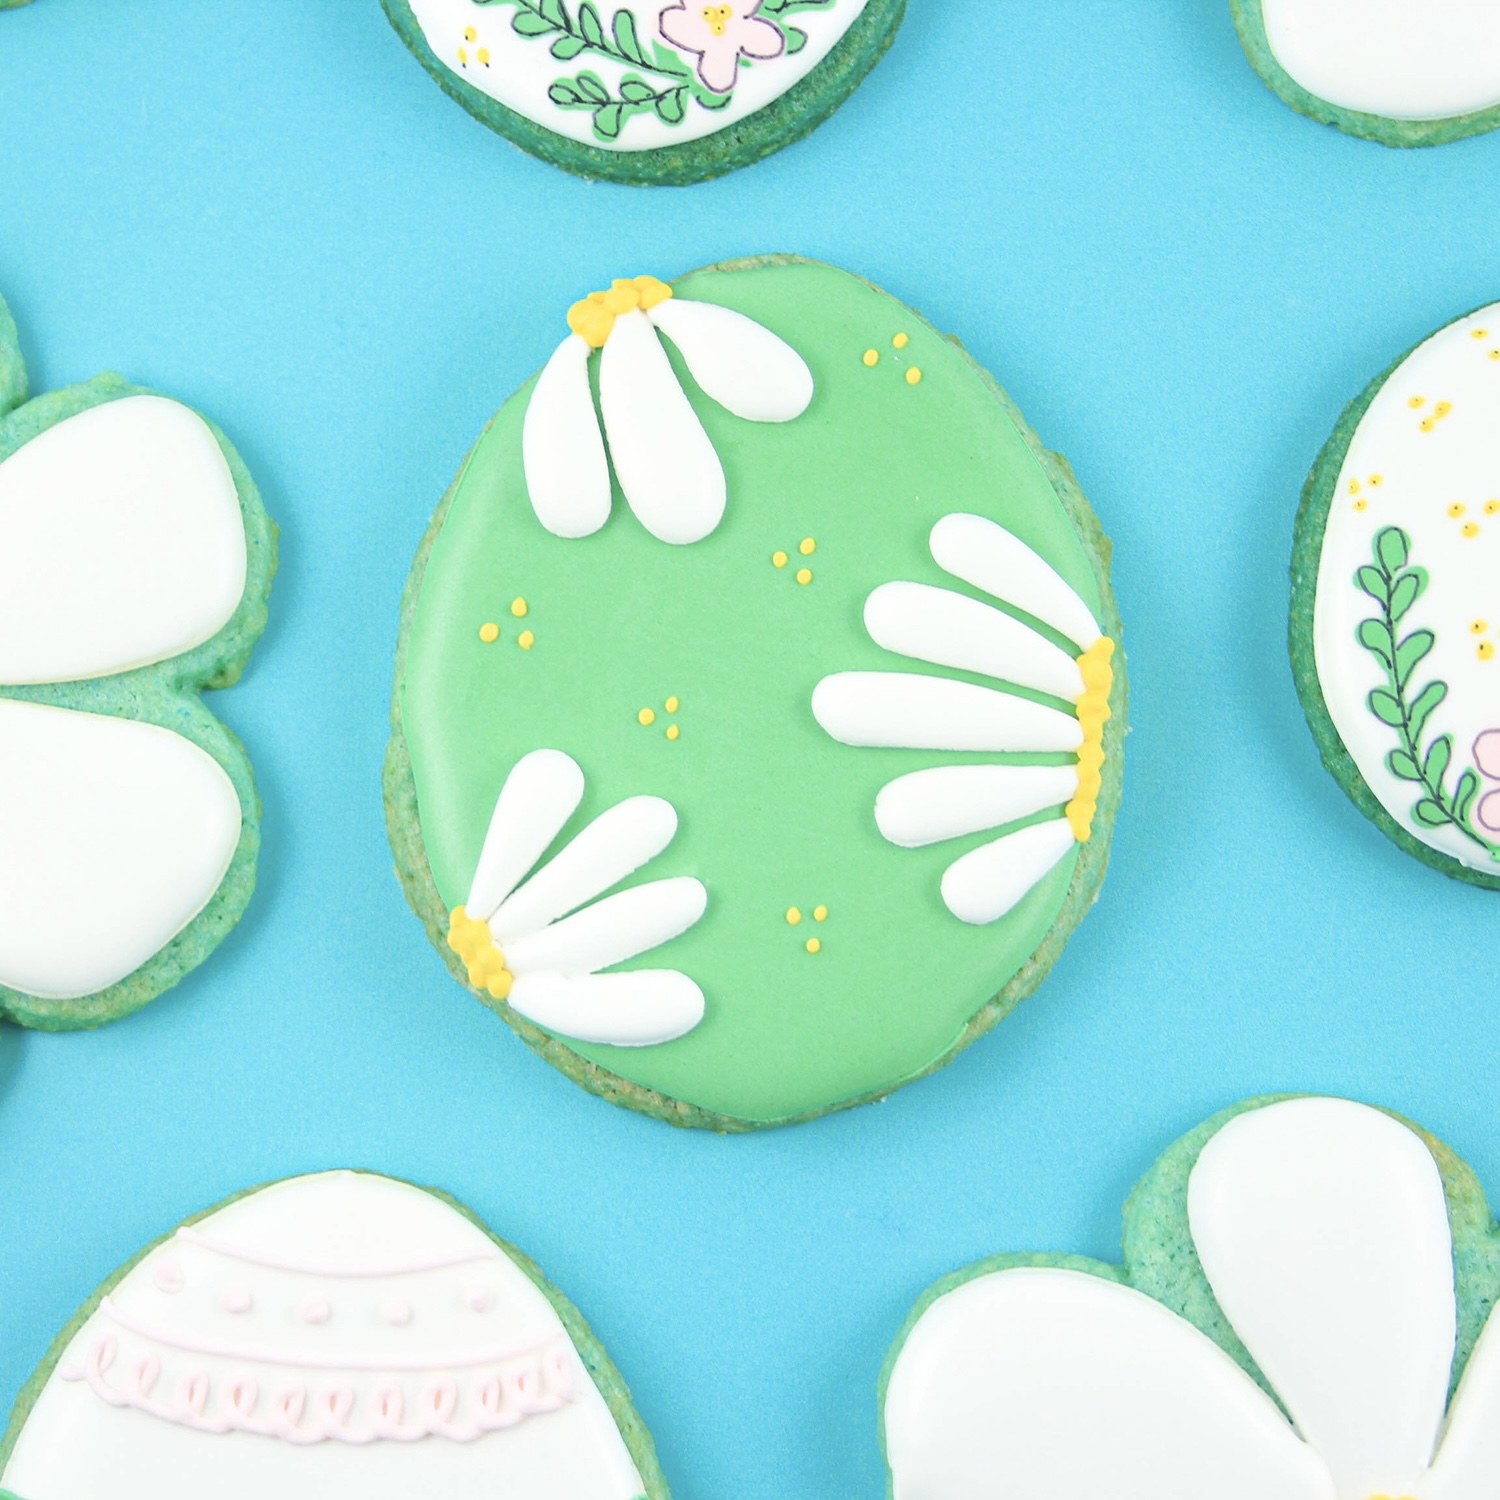 Blue Sugar Cookie Cut Out Egg decorated with royal icing daisy petals